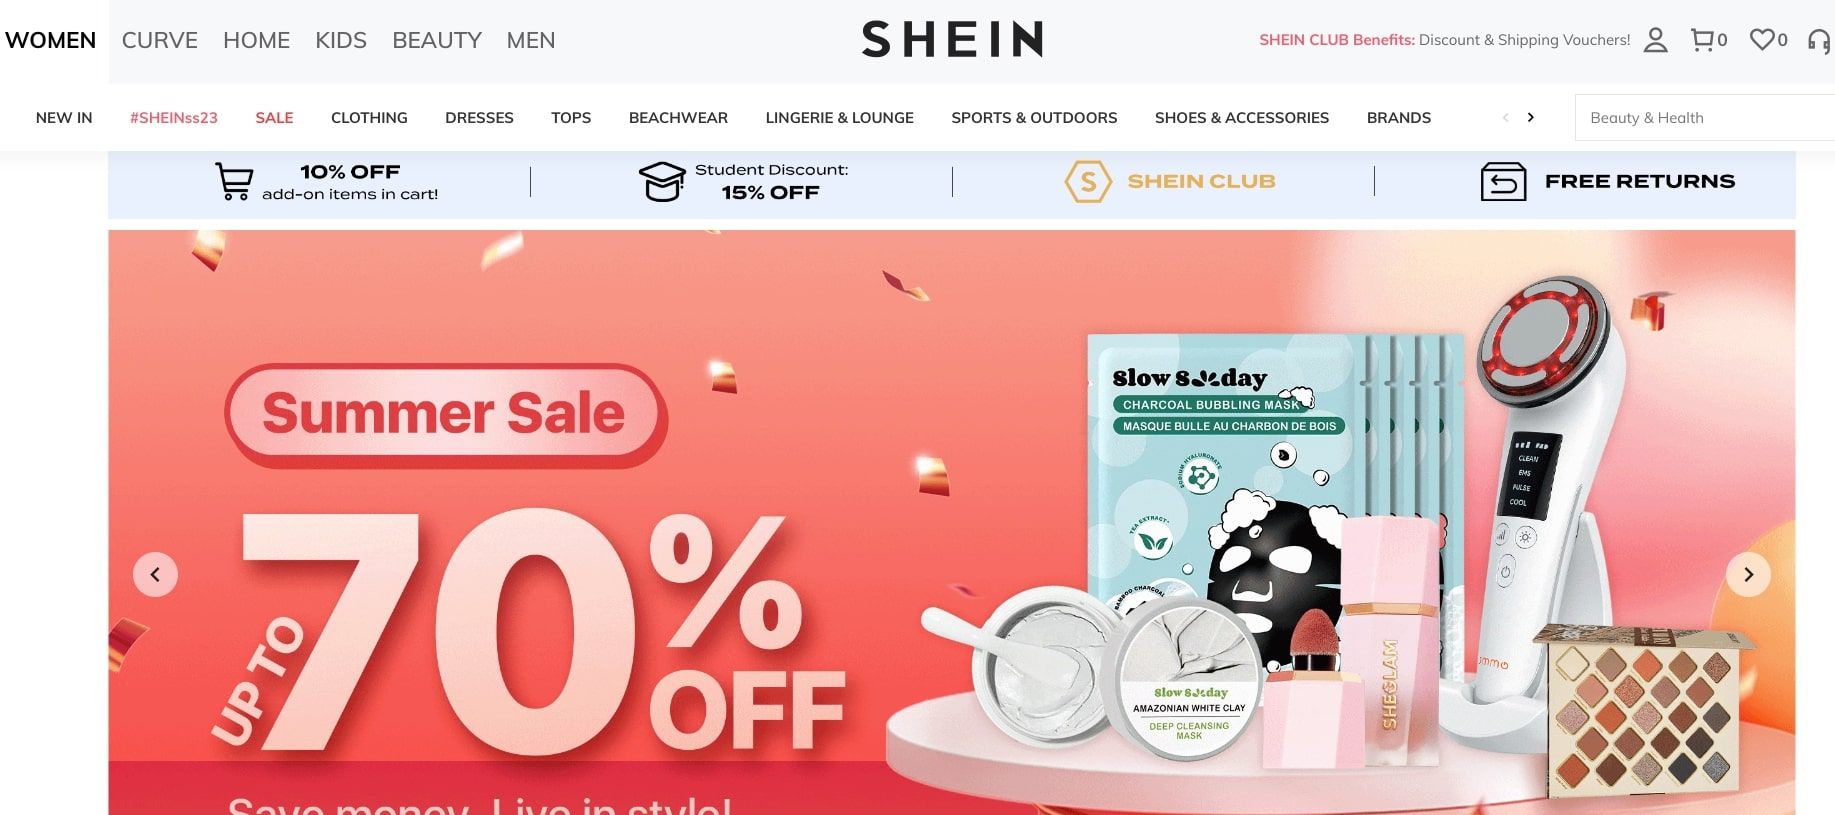 SHEIN Data Stealing Activity Detected in Android App